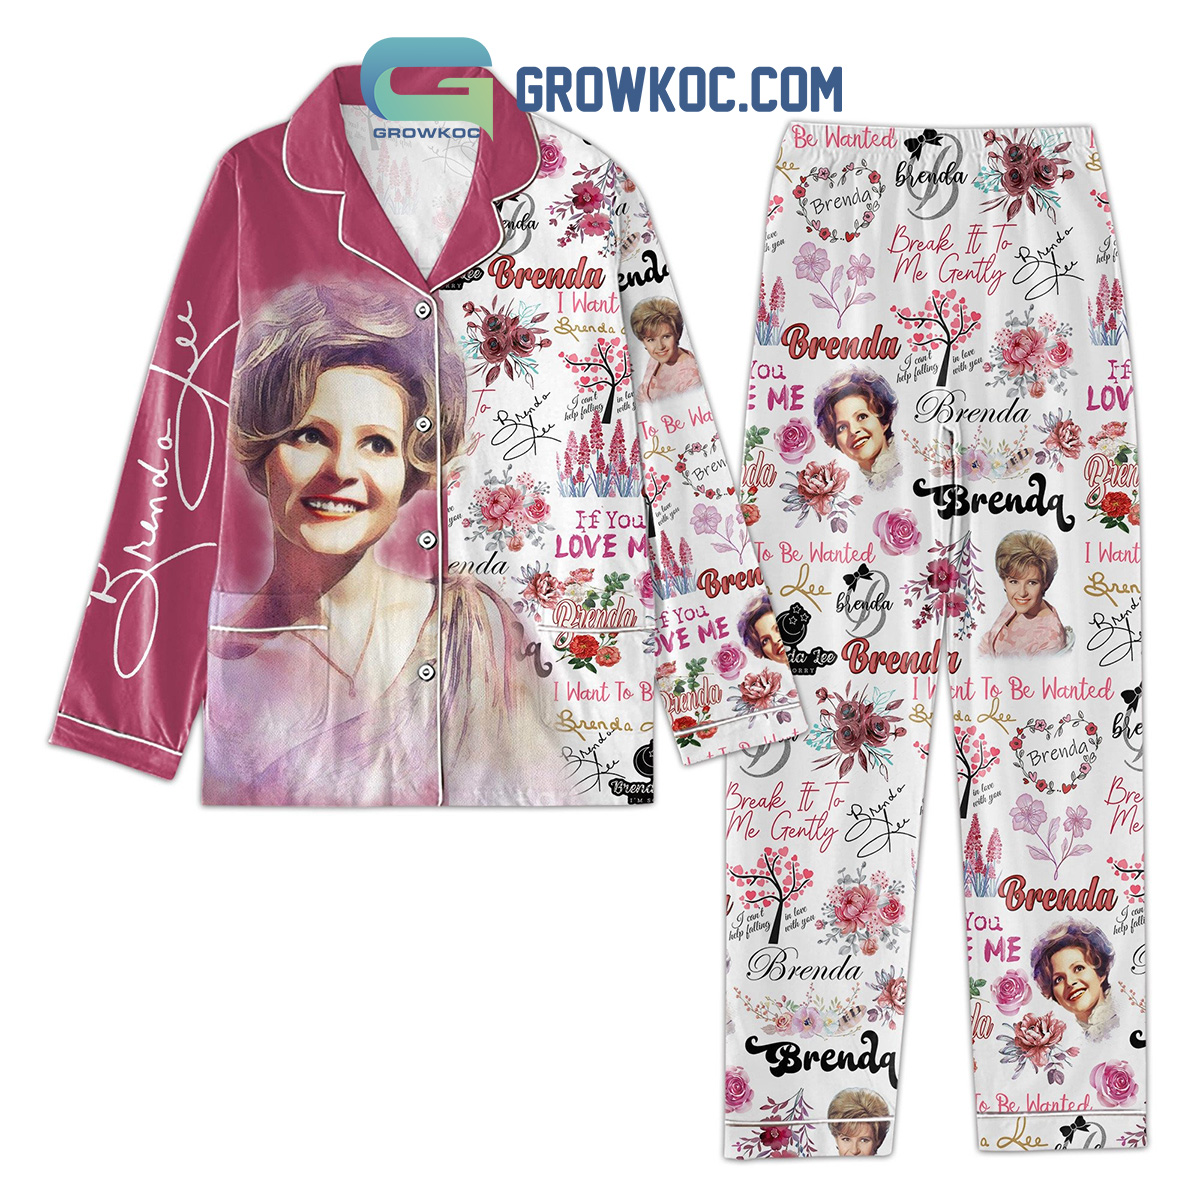 I Want To Be Wanted Brenda Lee I Cans't Help Falling In Love With You Pajamas Sets